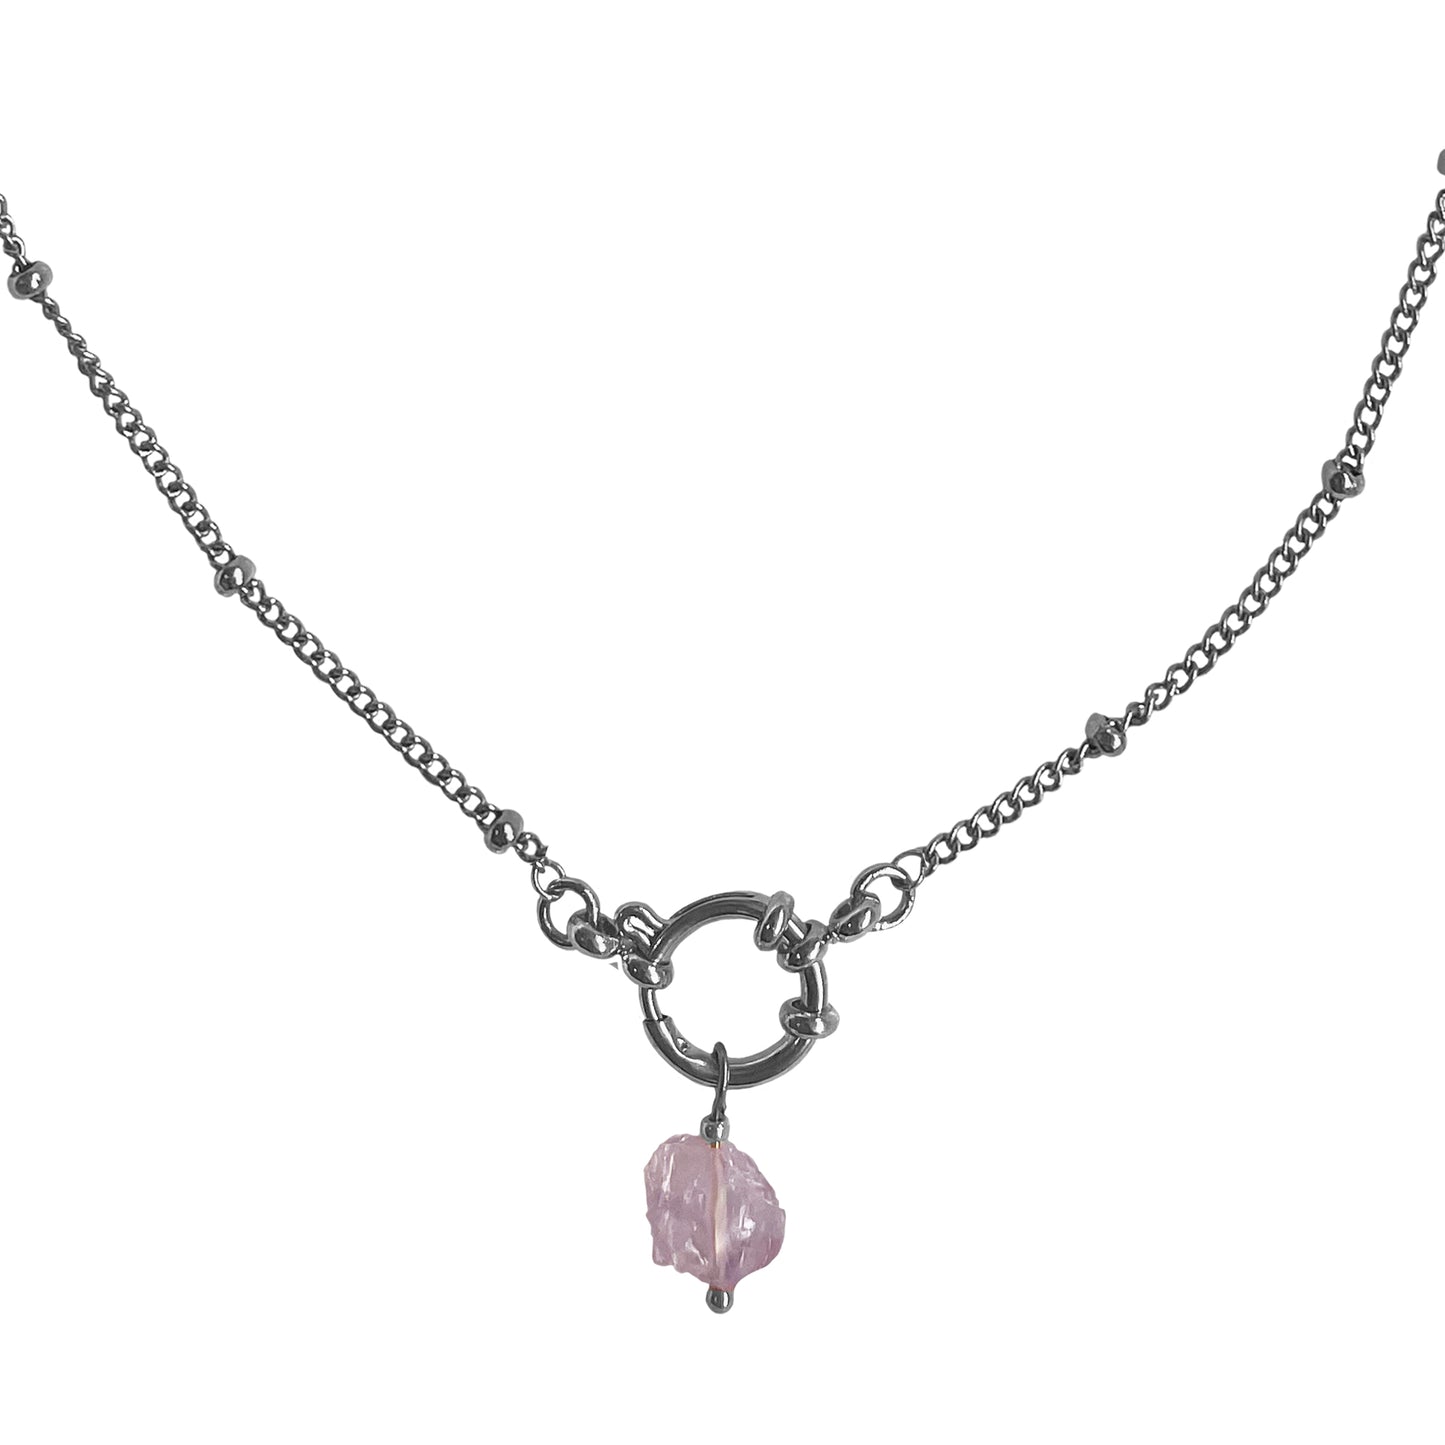 Lilac Stone Necklace